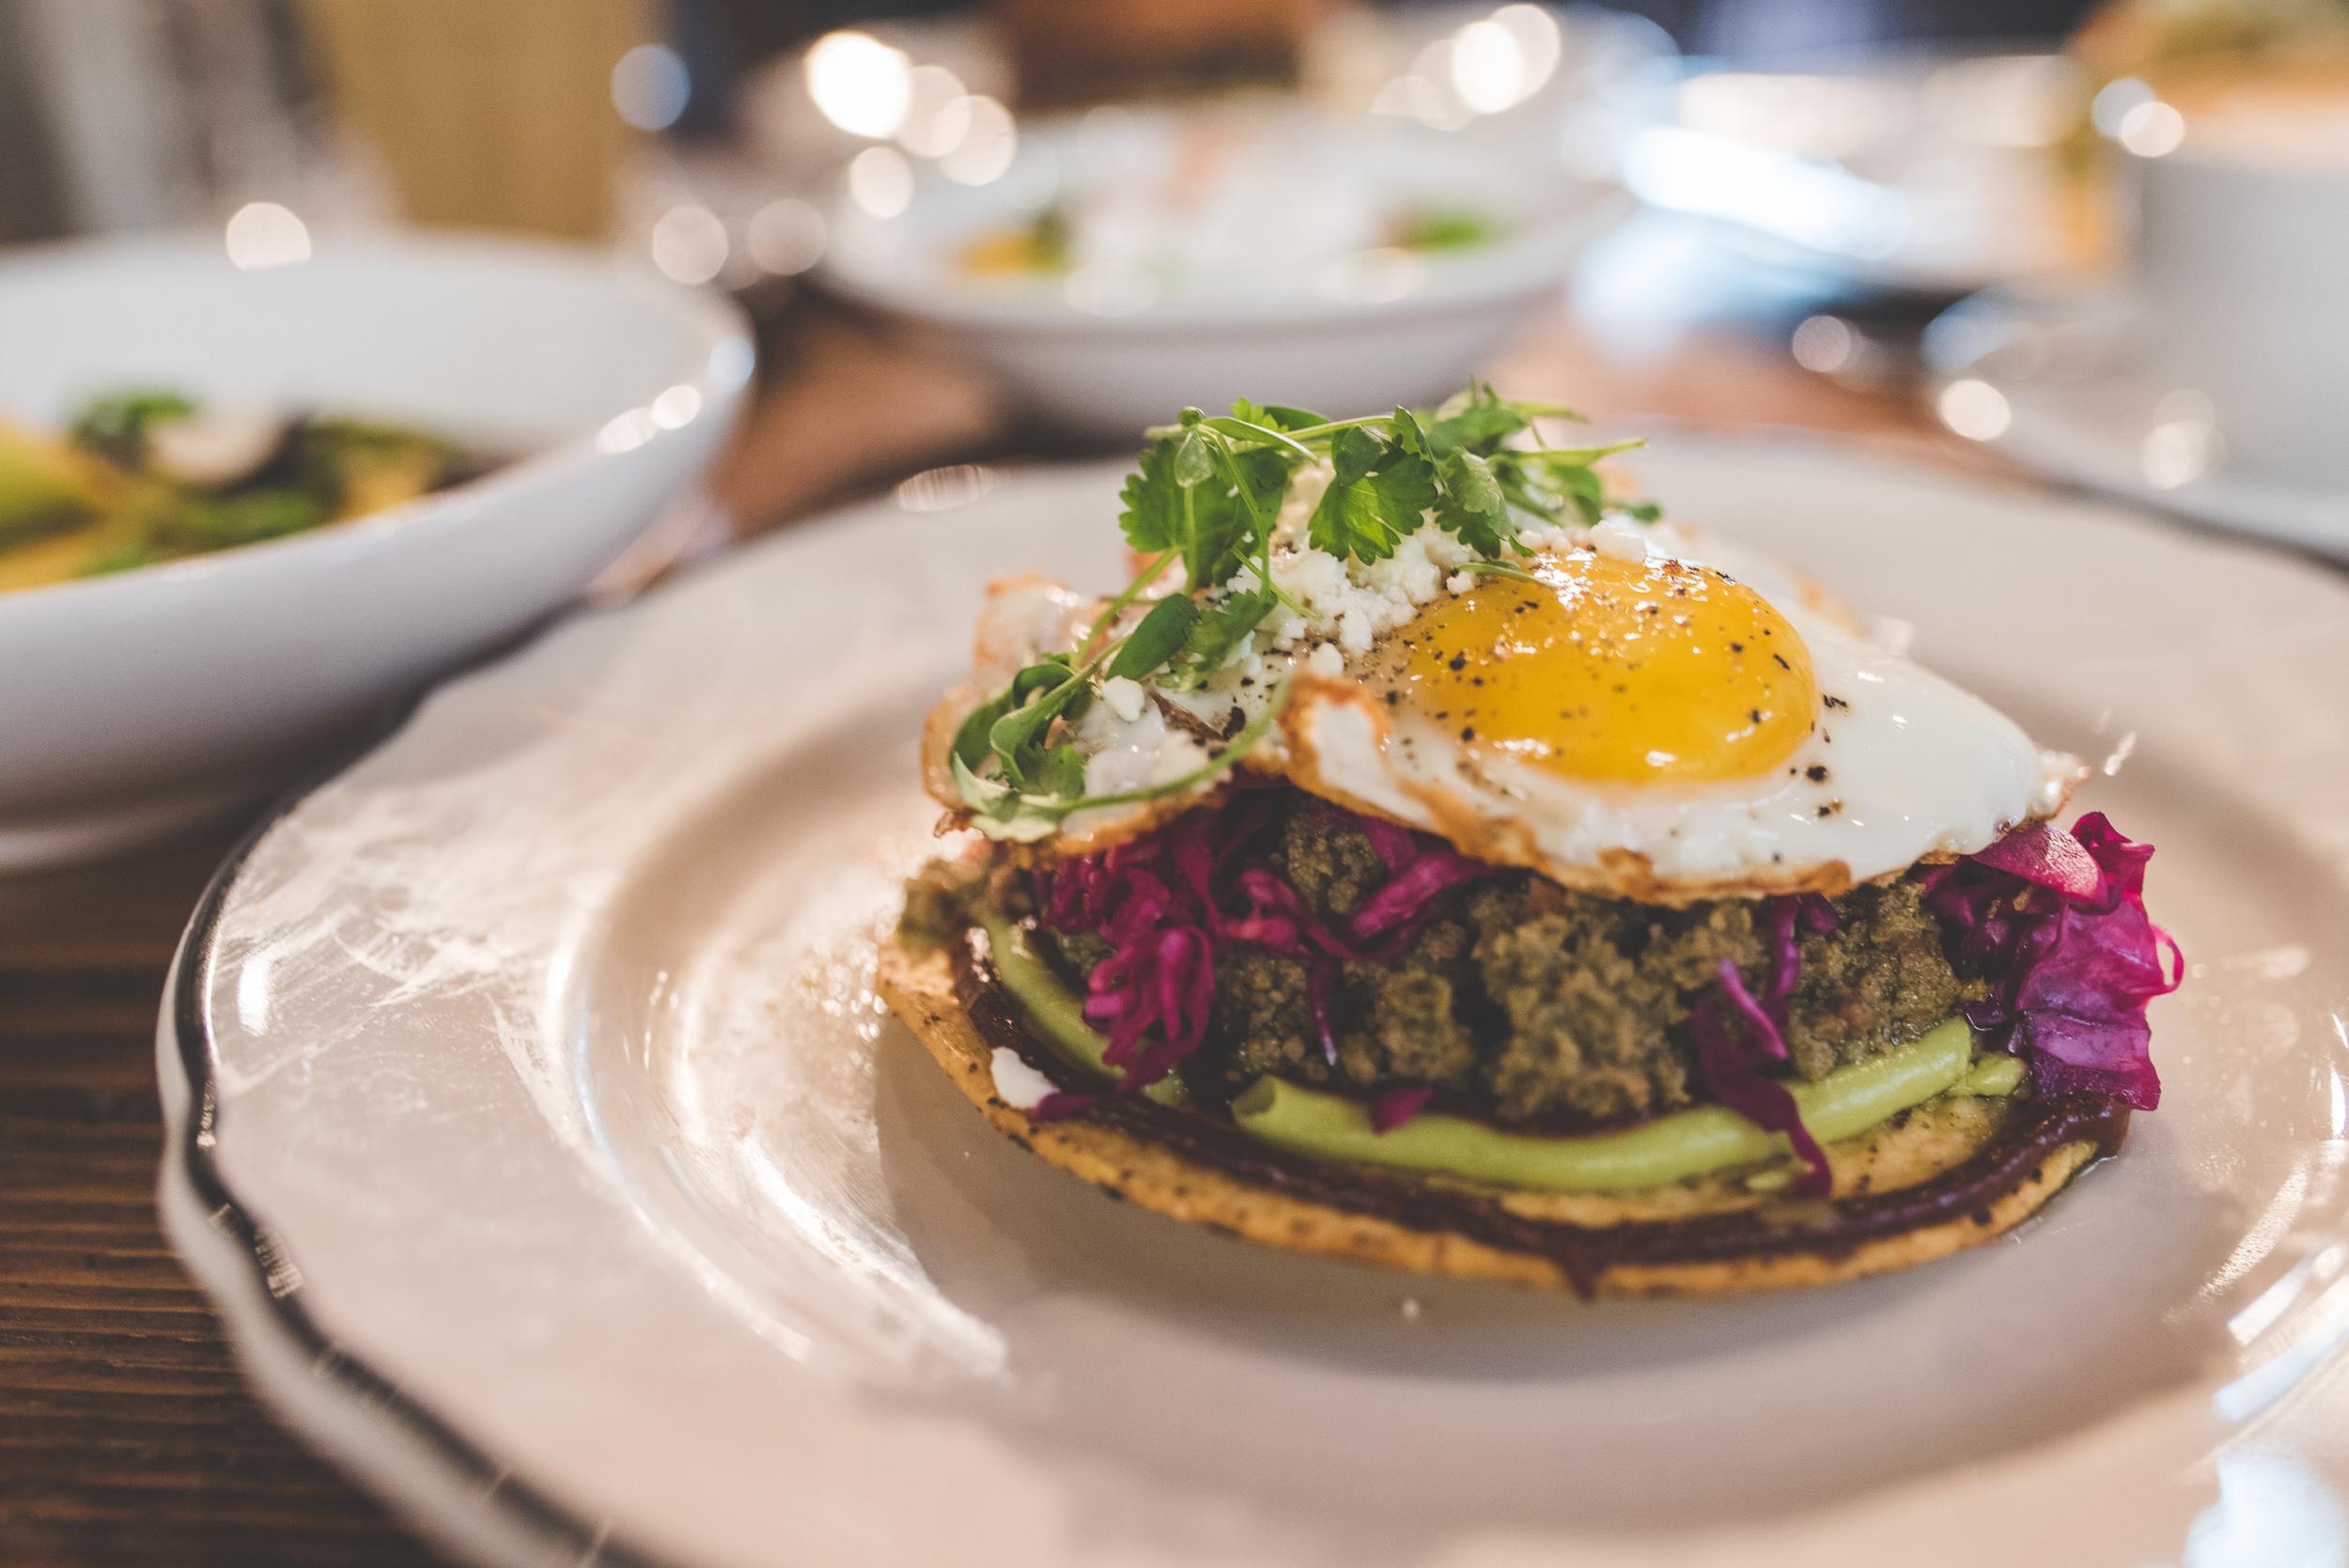 Head to Clementine for an inventive brunch